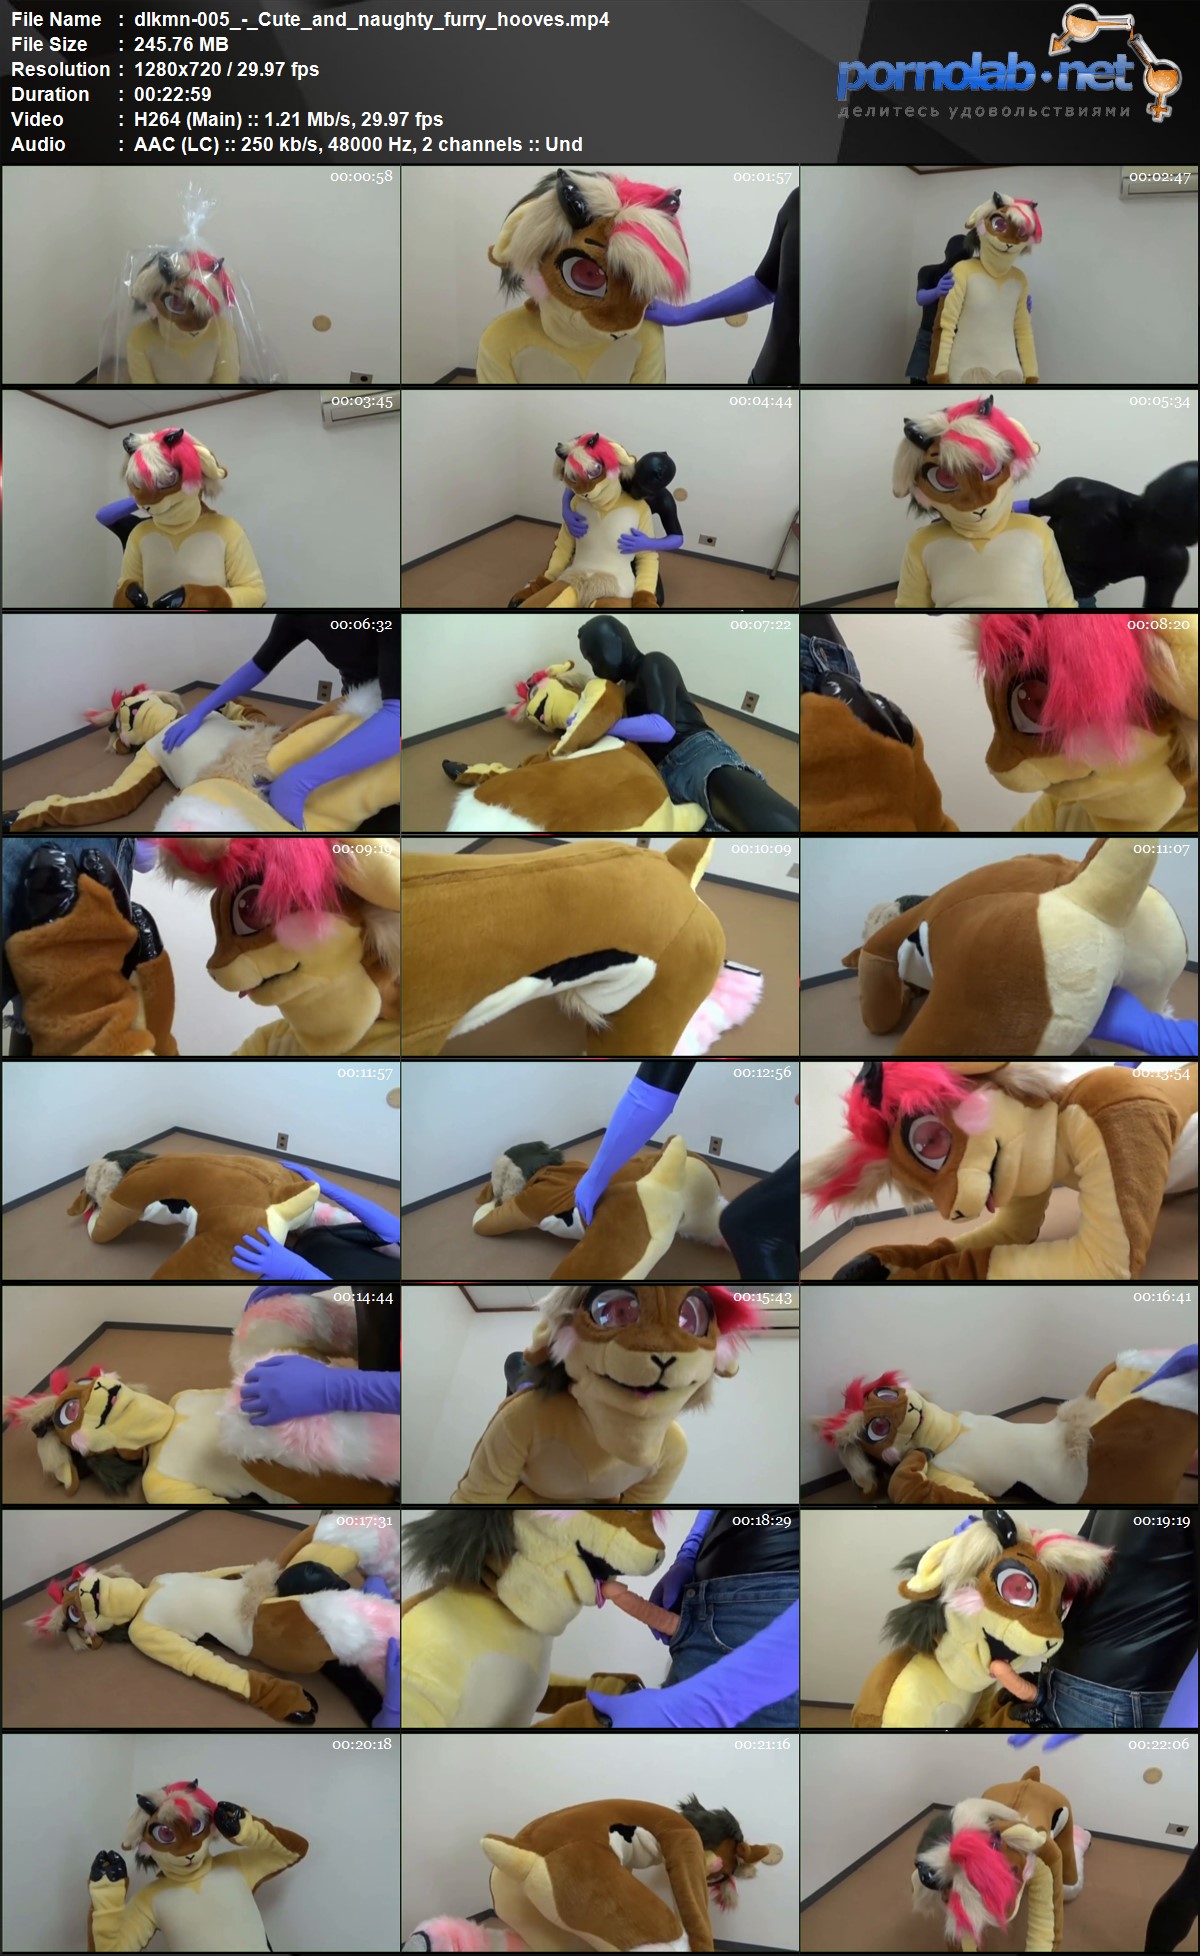 dlkmn 005 Cute and naughty furry hooves mp 4